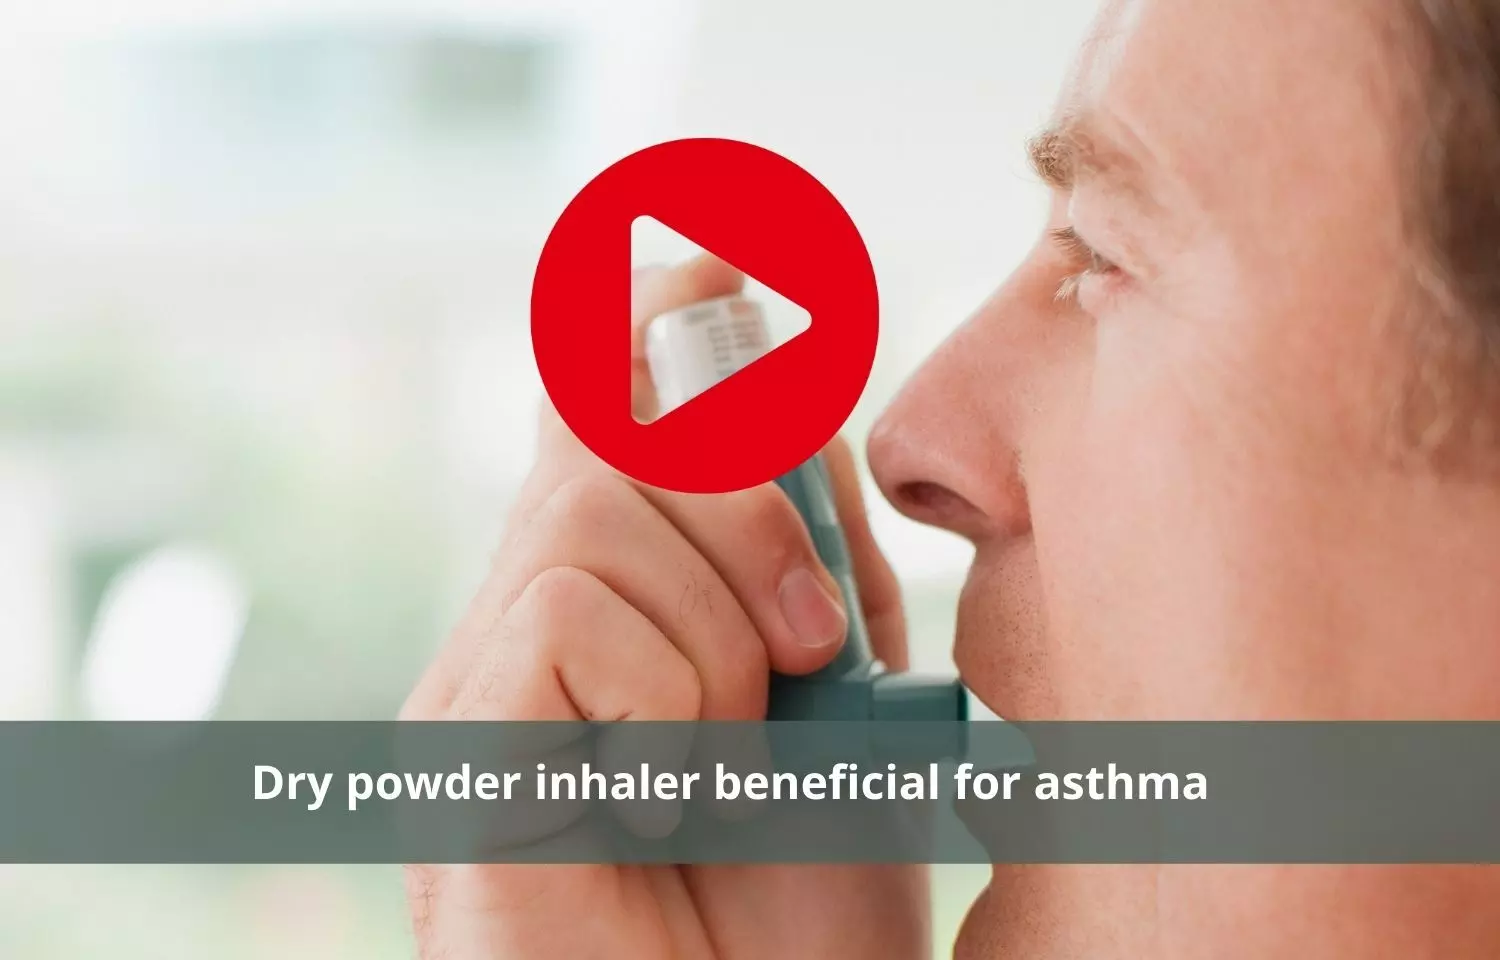 Asthma treated effectively by dry inhaler powder